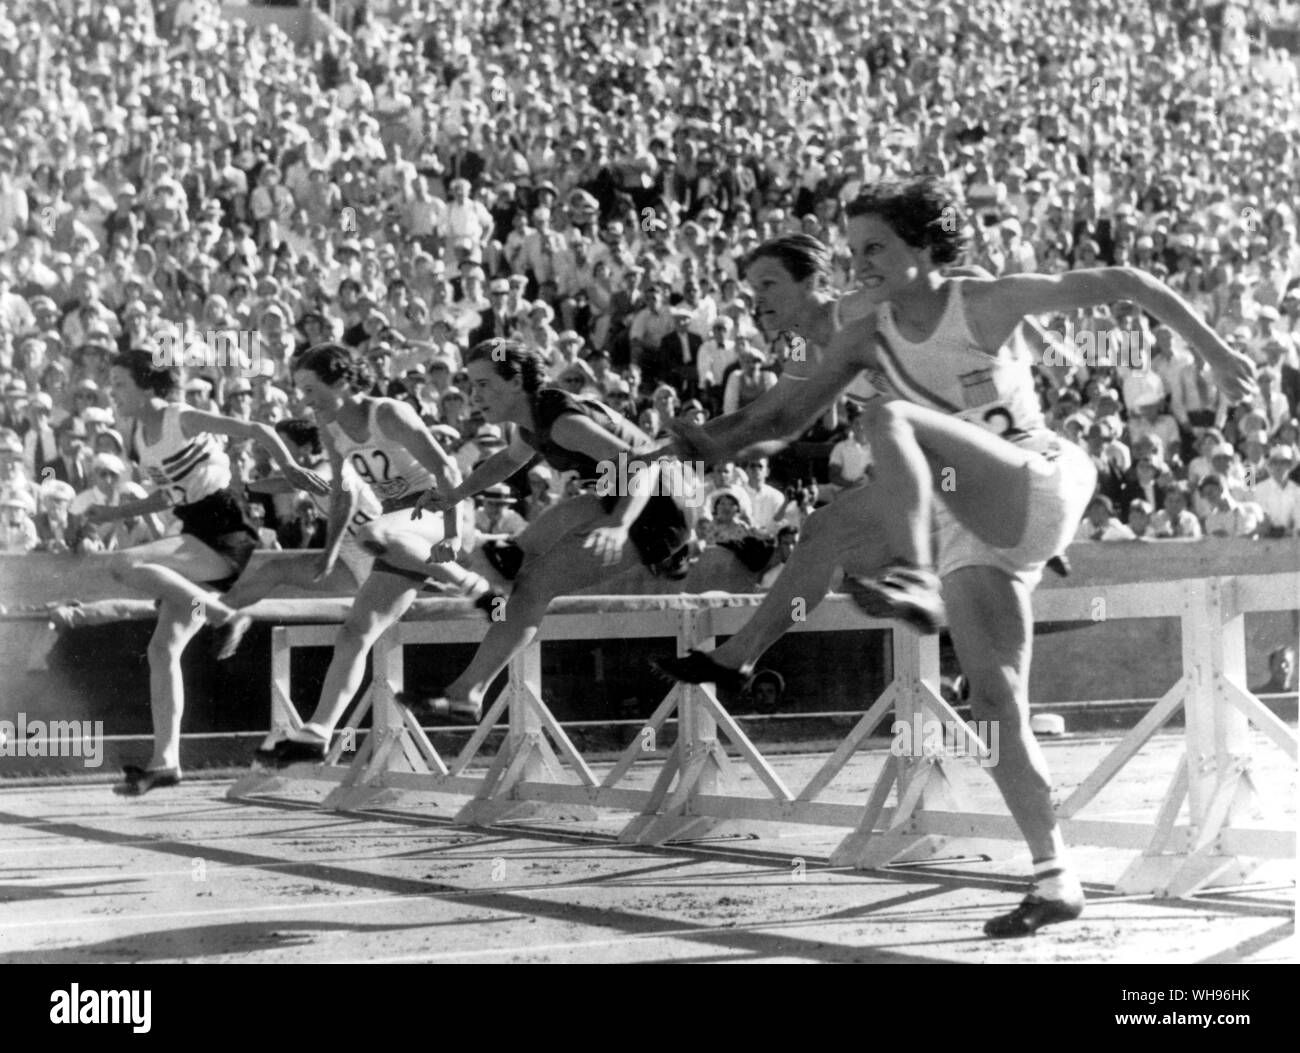 1932 olympic games in los angeles Banque d'images noir et blanc - Page 2 -  Alamy